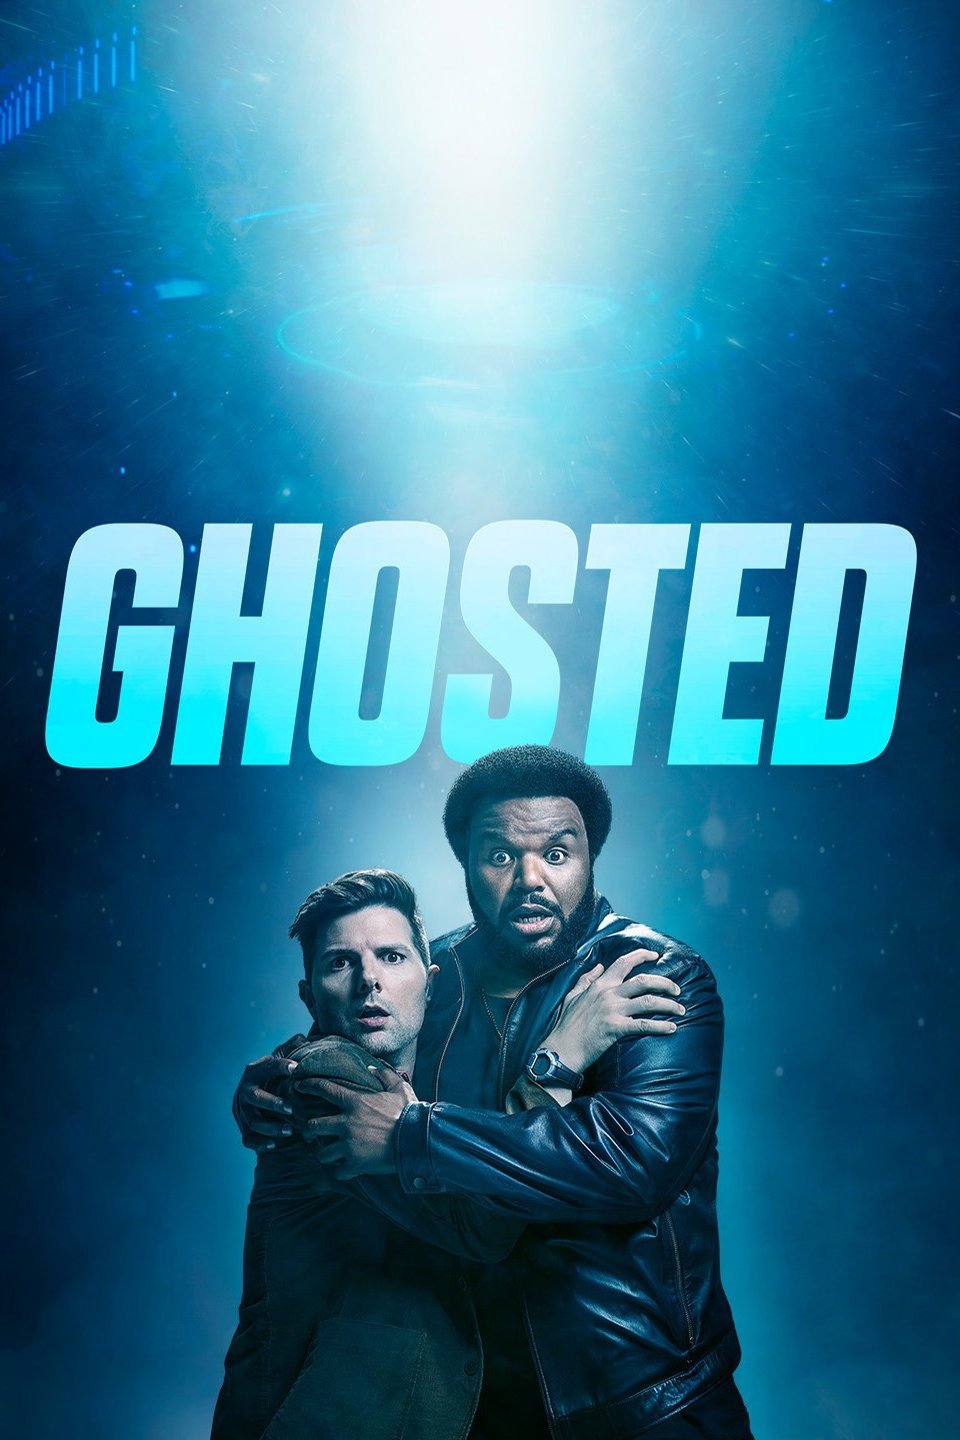 ghosted full movie netflix